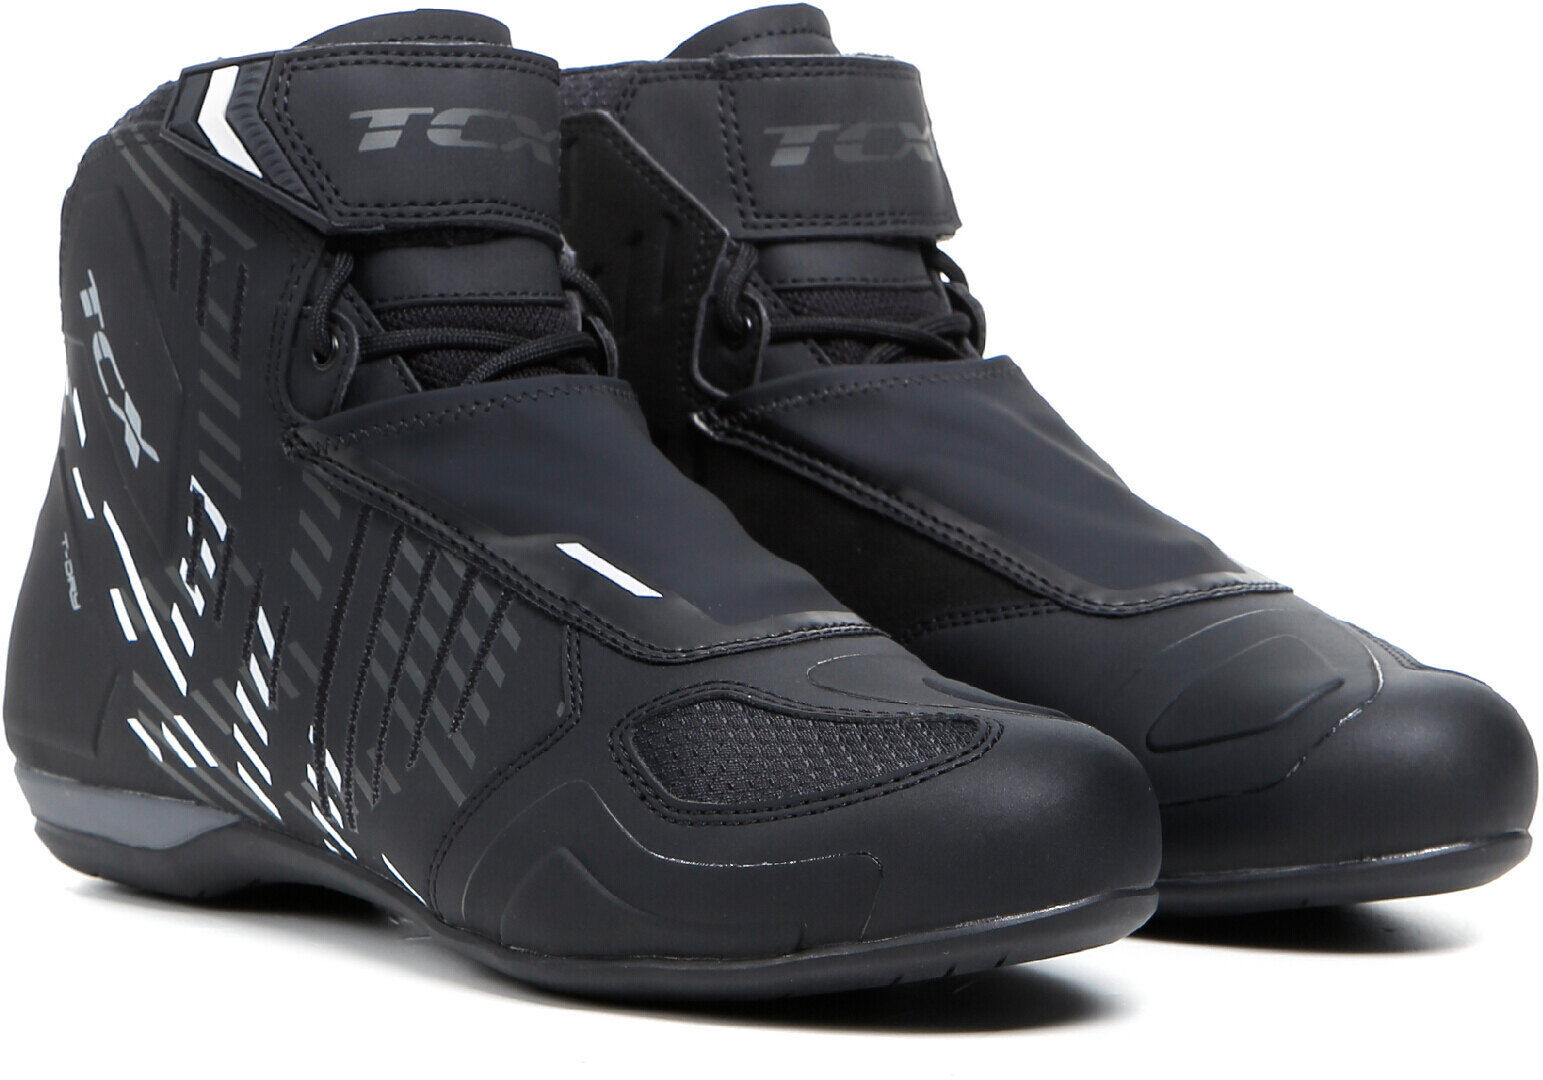 Tcx Ro4d Wp Motorcycle Shoes  - Black White